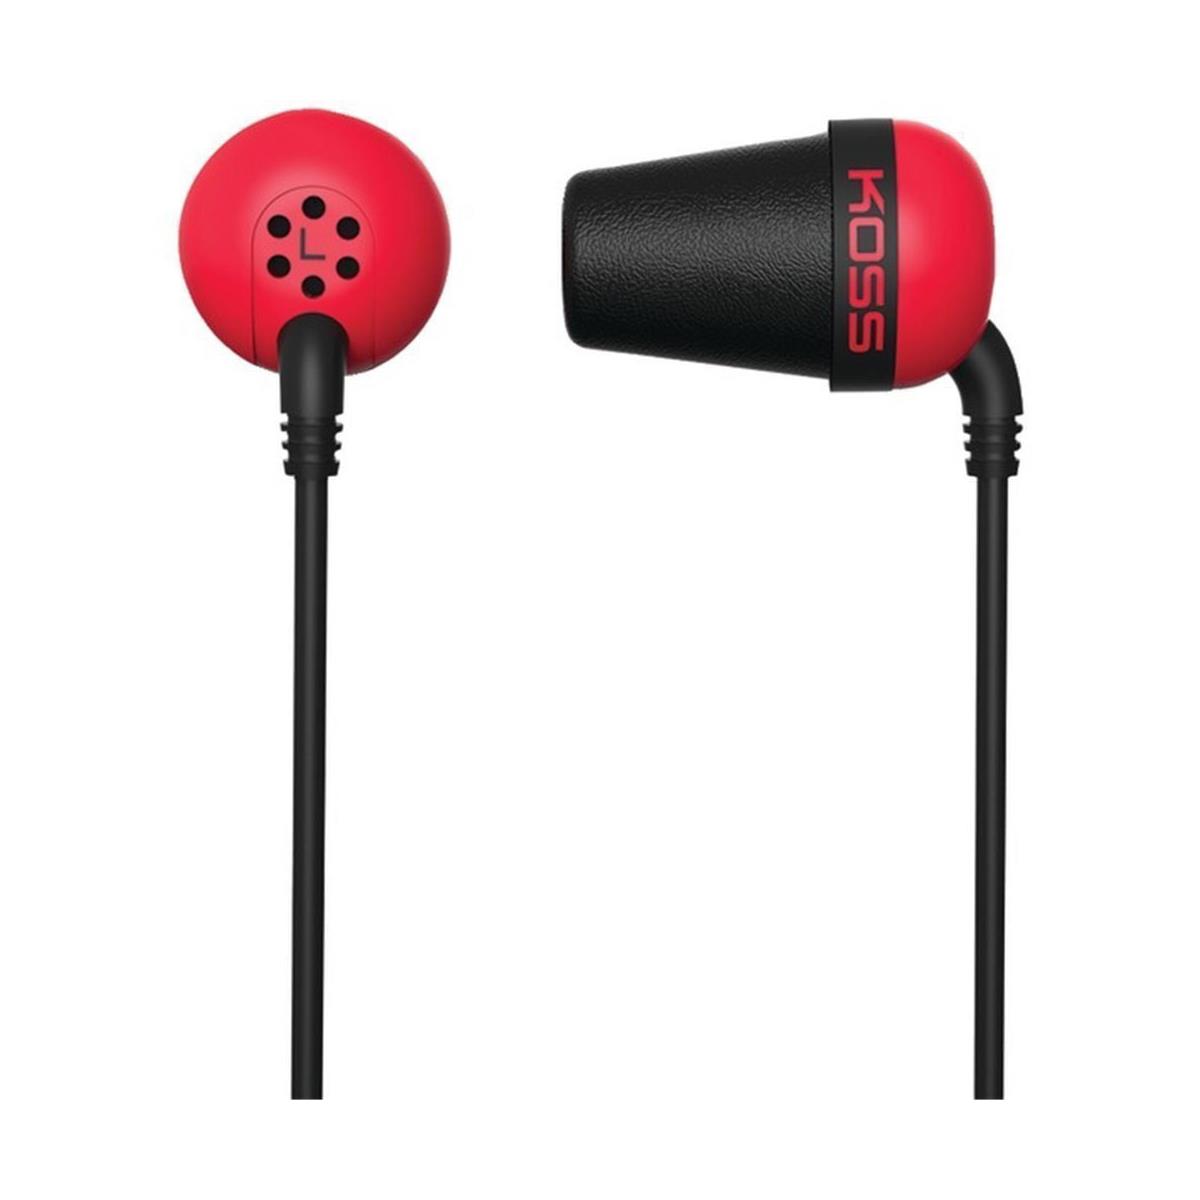 

Koss Plug Earbud Noise Isolating Headphones with Memory Foam Cushions, Red